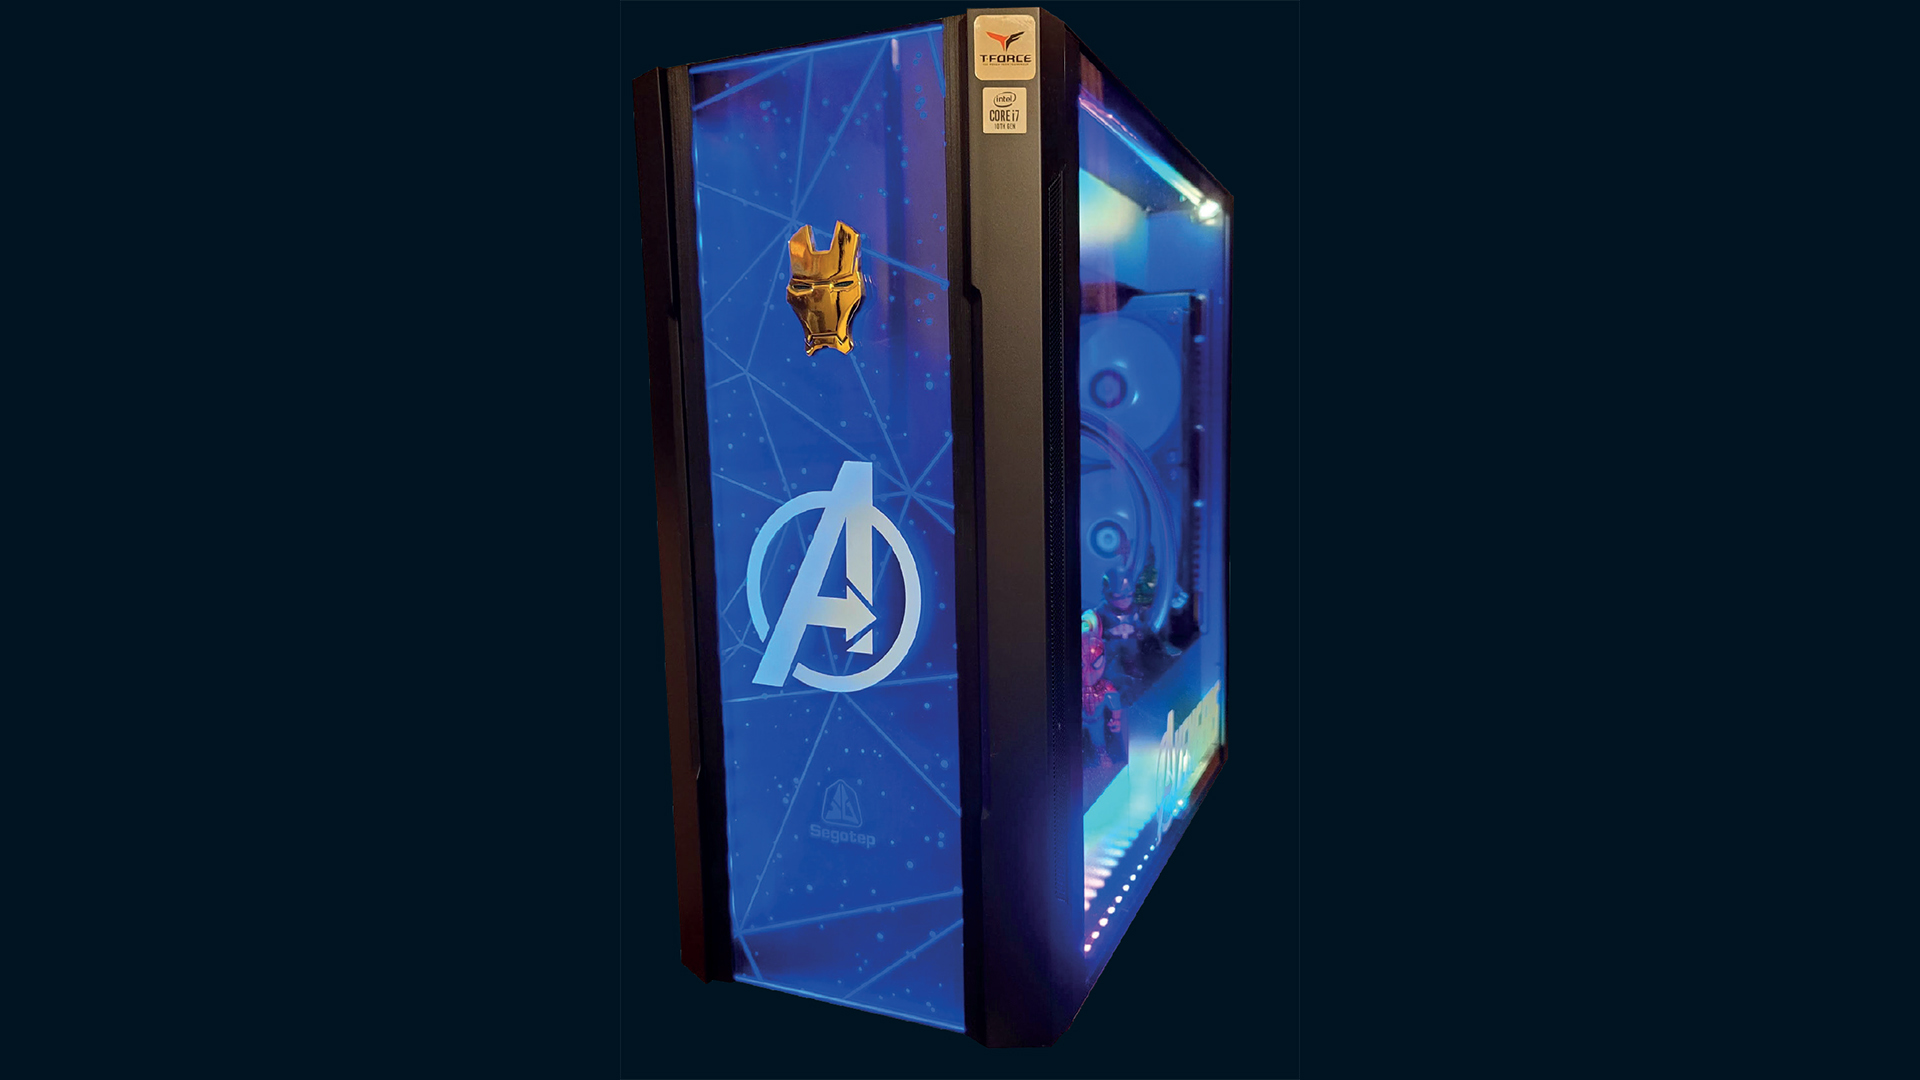 The Avengers assemble in this glowing gaming PC build